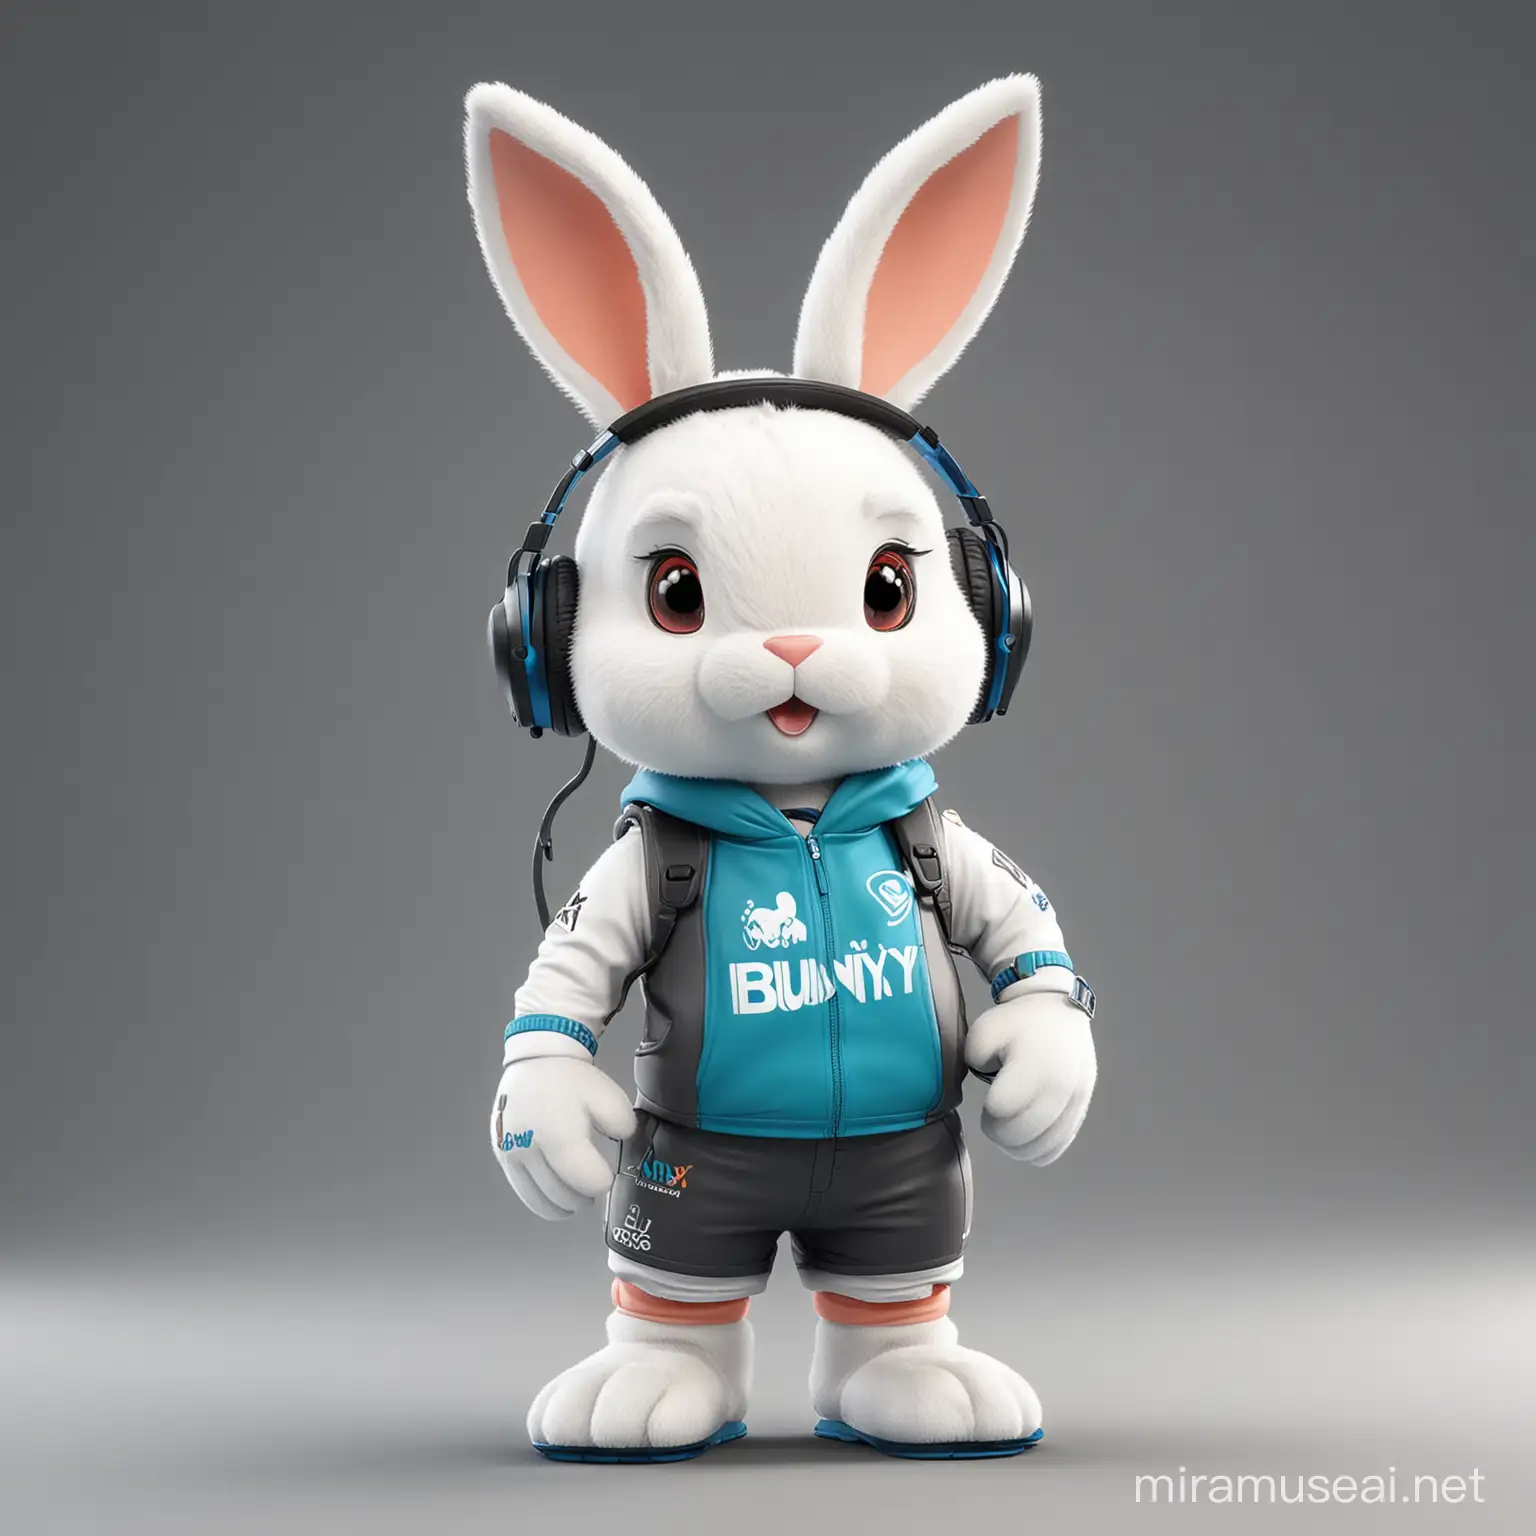 Sporty Bunny Mascot Motivating on 35Degree Inclined Surface